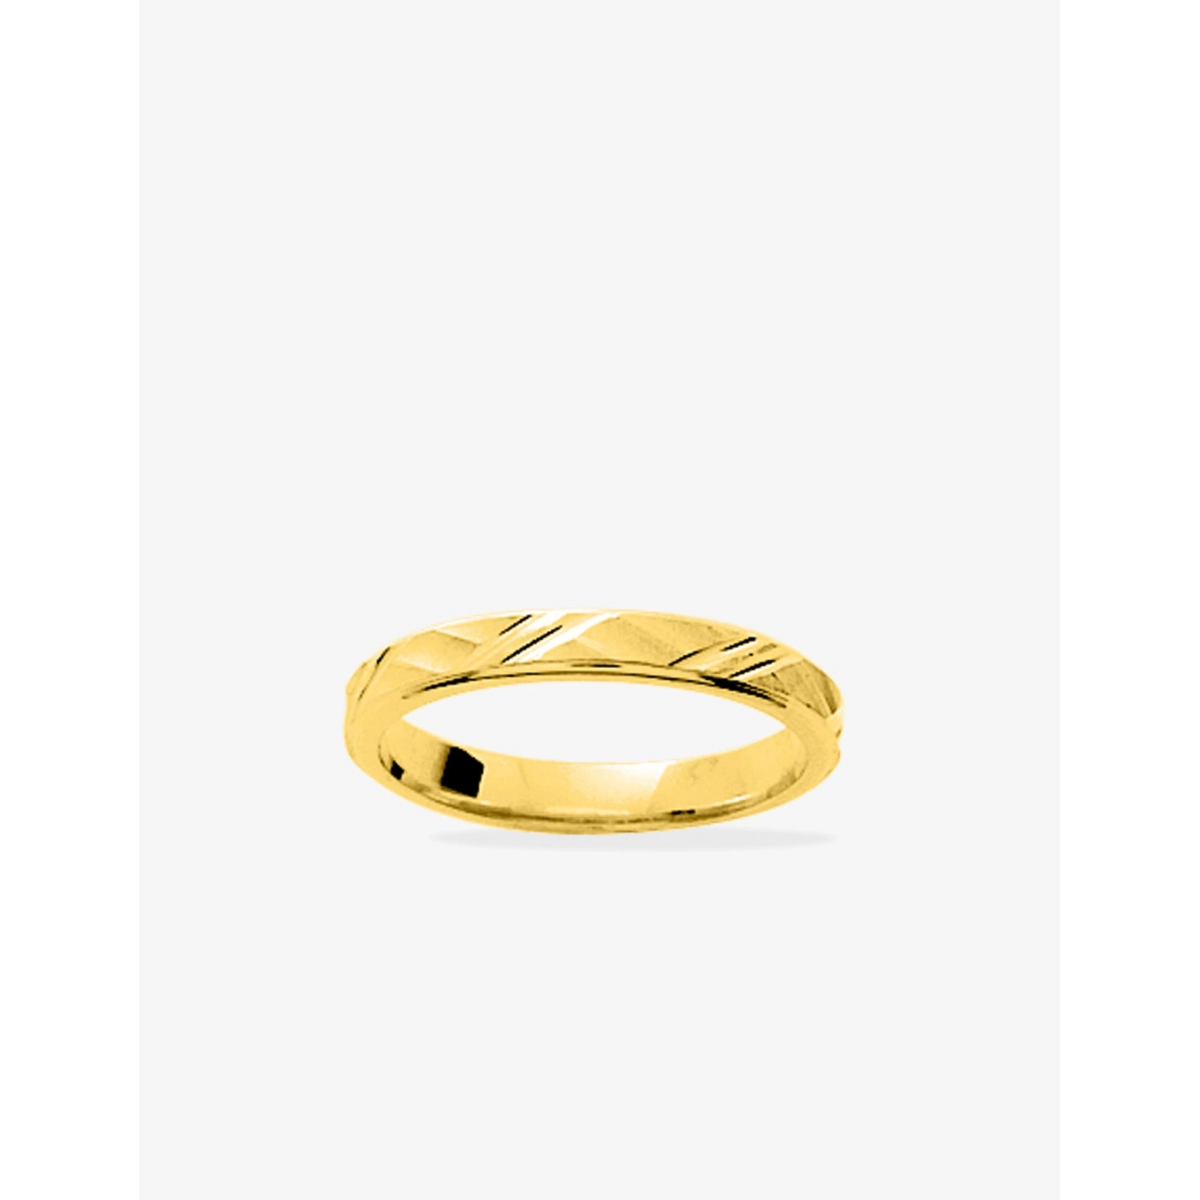 Wedding ring gold plated Brass Lua Blanca  250835 - Size 54